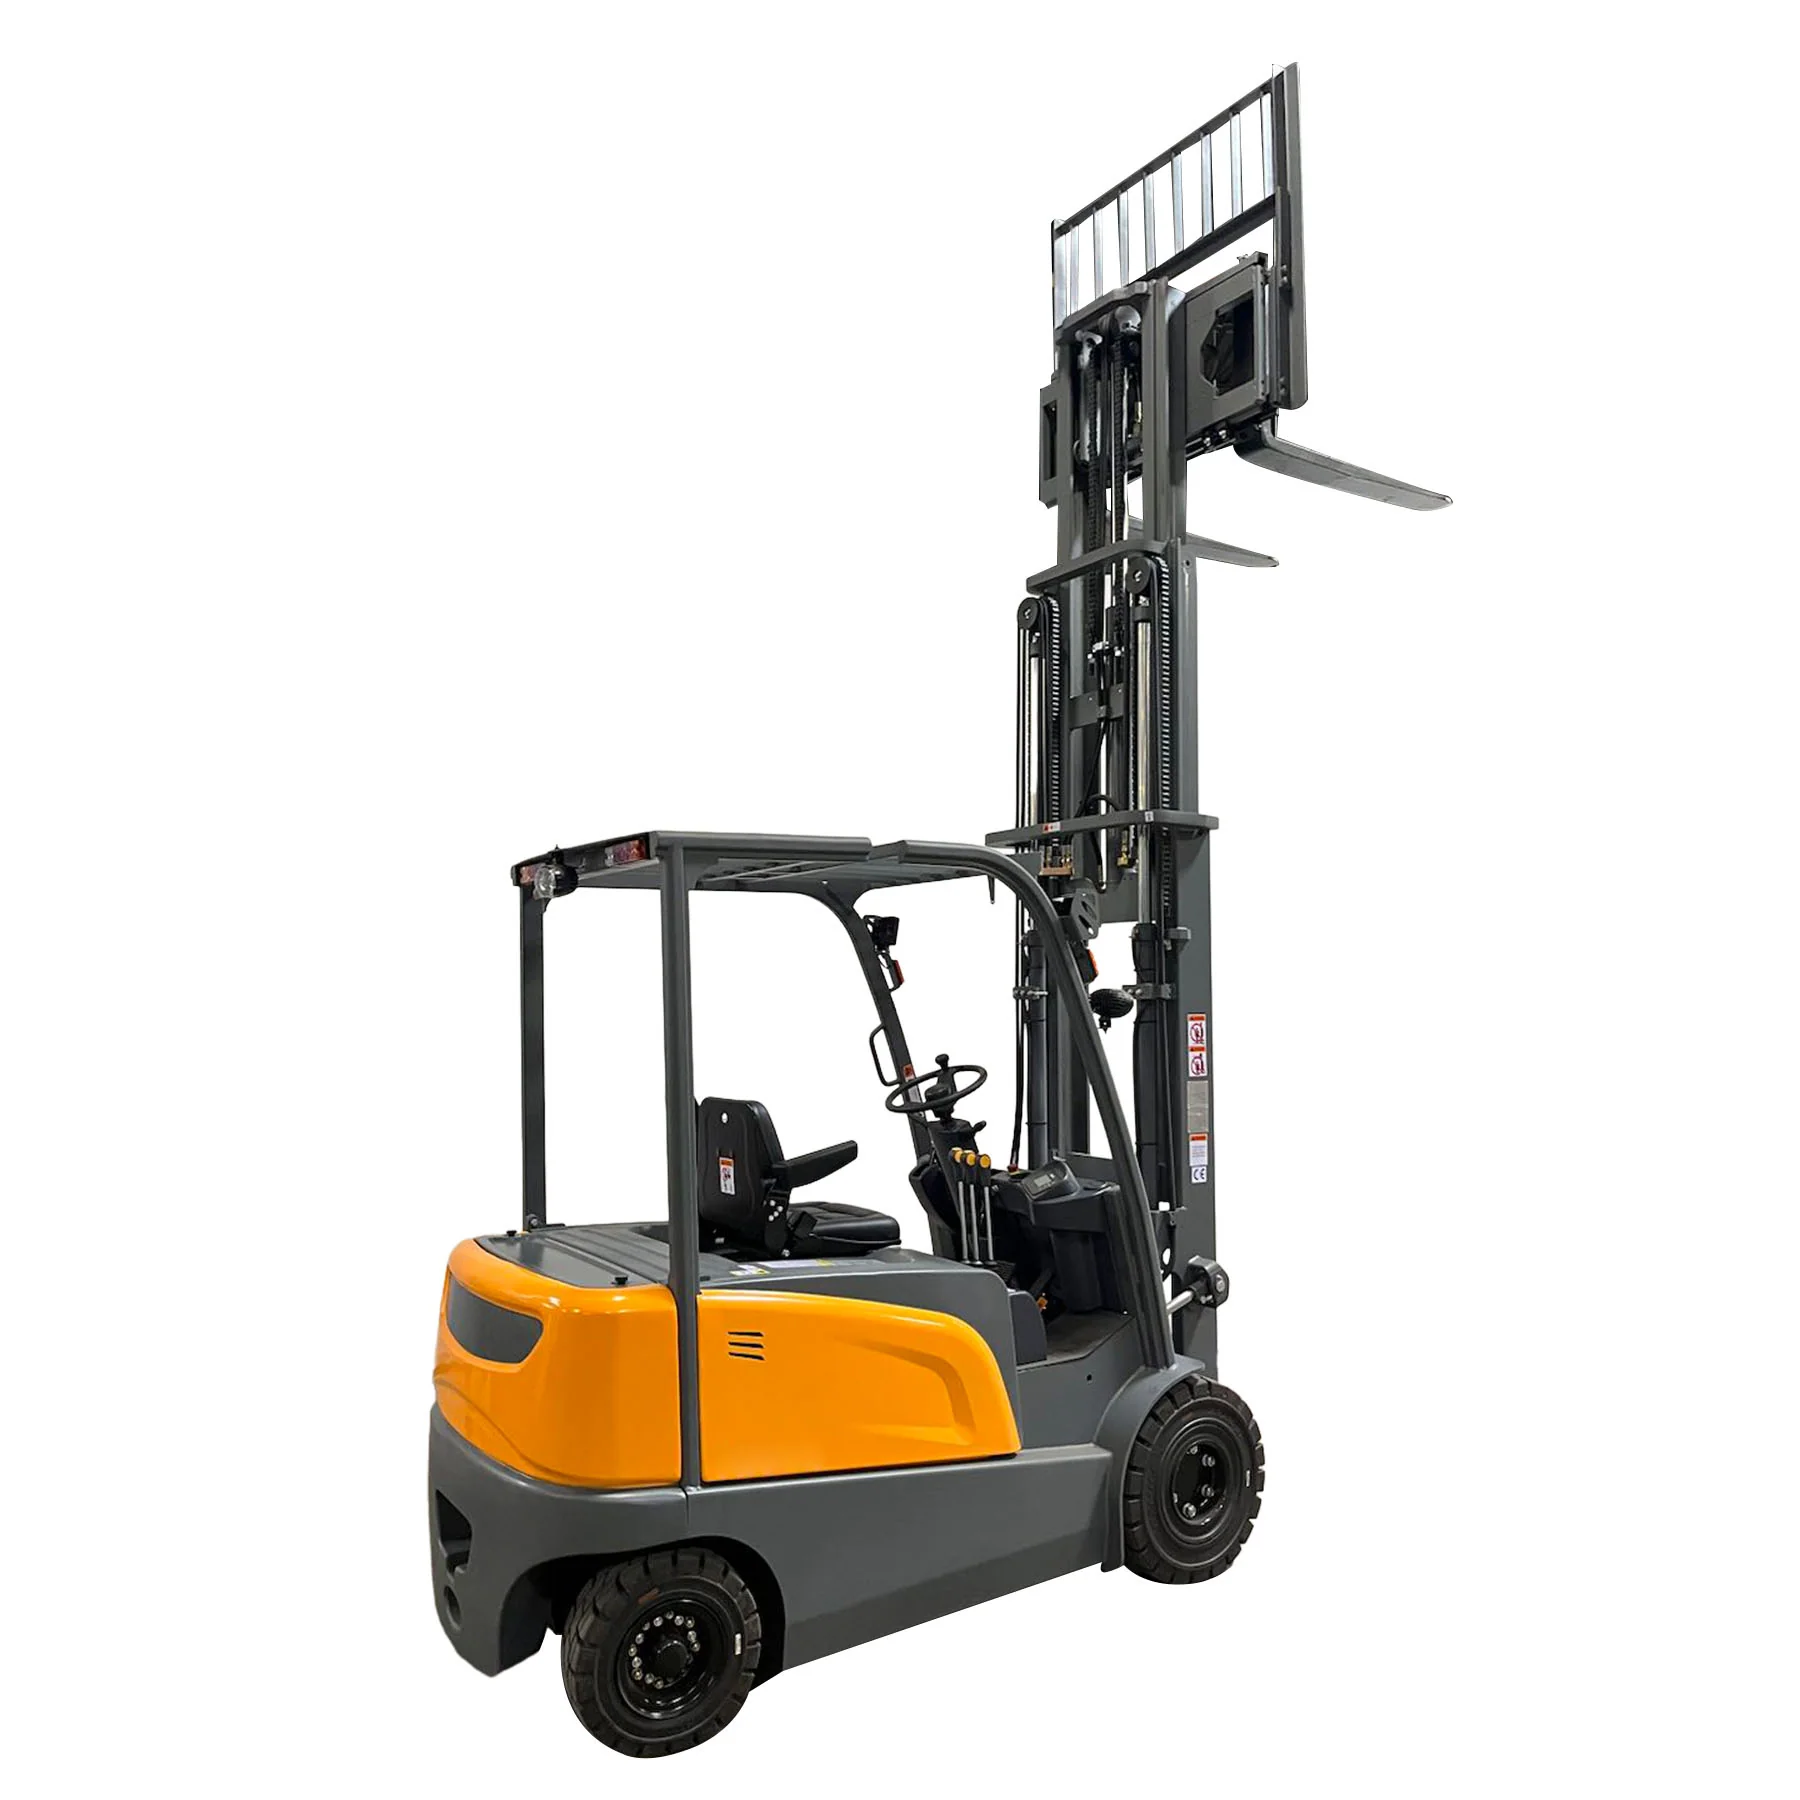 Apollolift, Apollolift A-4014 Electric Forklift Lead Acid Battery Powered 4 Wheel 197" Lifting 6600 lbs. Capacity New